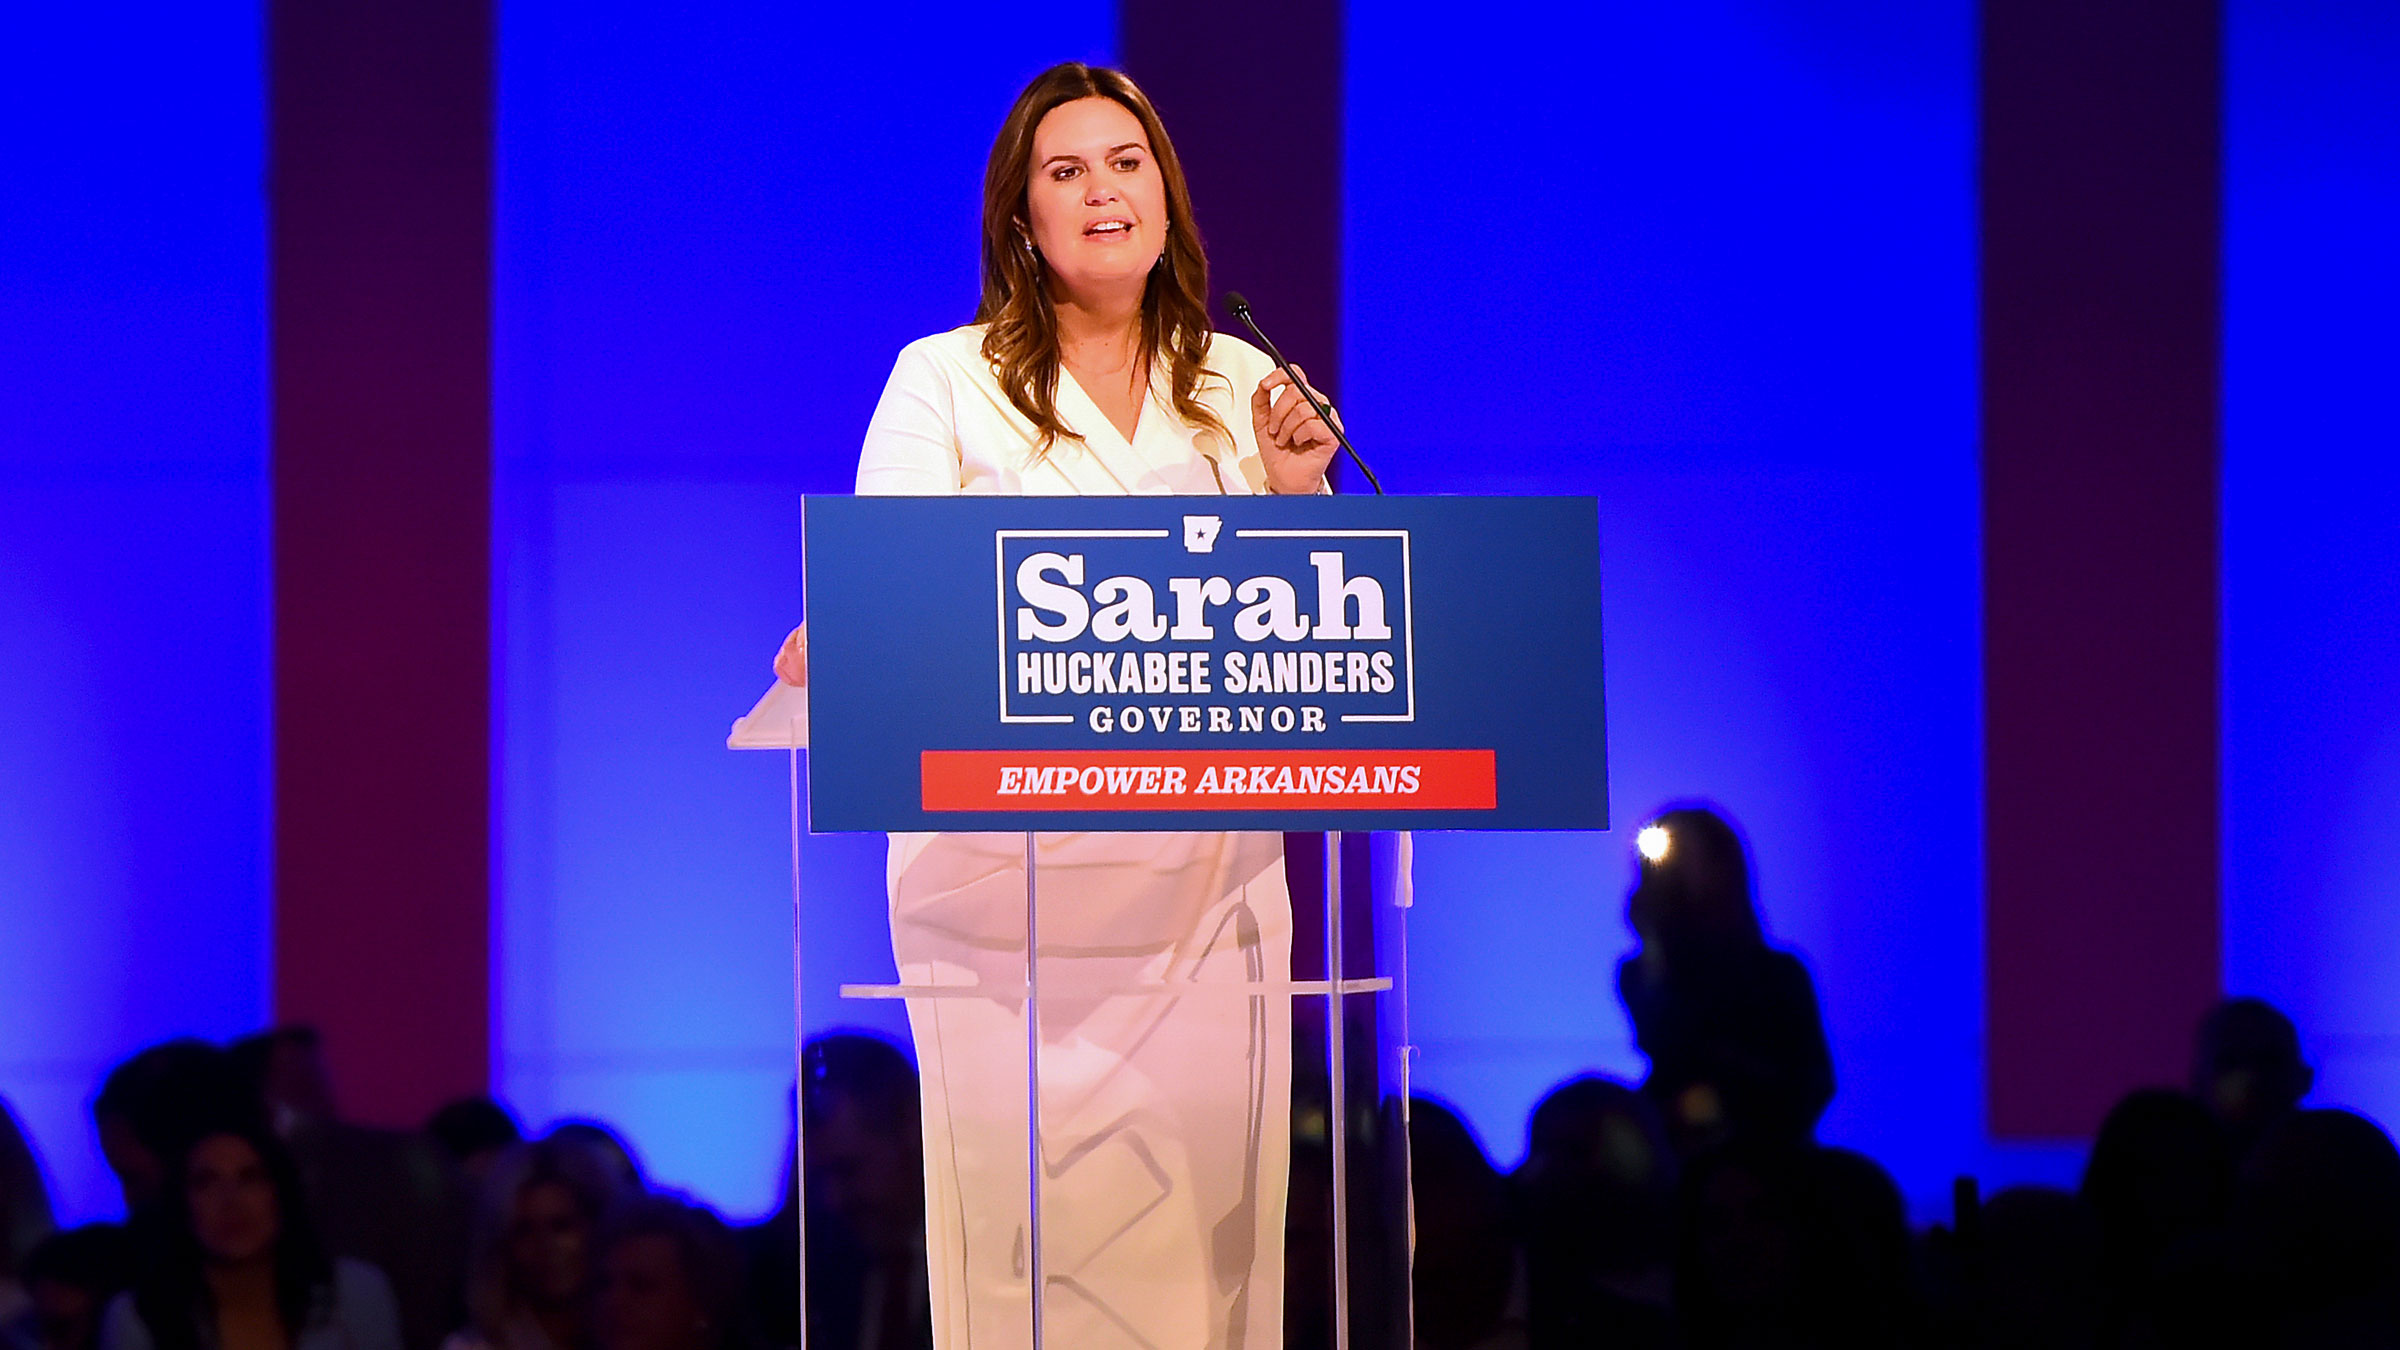 Sarah Huckabee Sanders, the one-time press secretary and communications director for former President Donald Trump, speaks during her election night party in Little Rock, Arkansas. CNN projects she will win Arkansas' gubernatorial race, becoming the first woman elected governor of Arkansas.